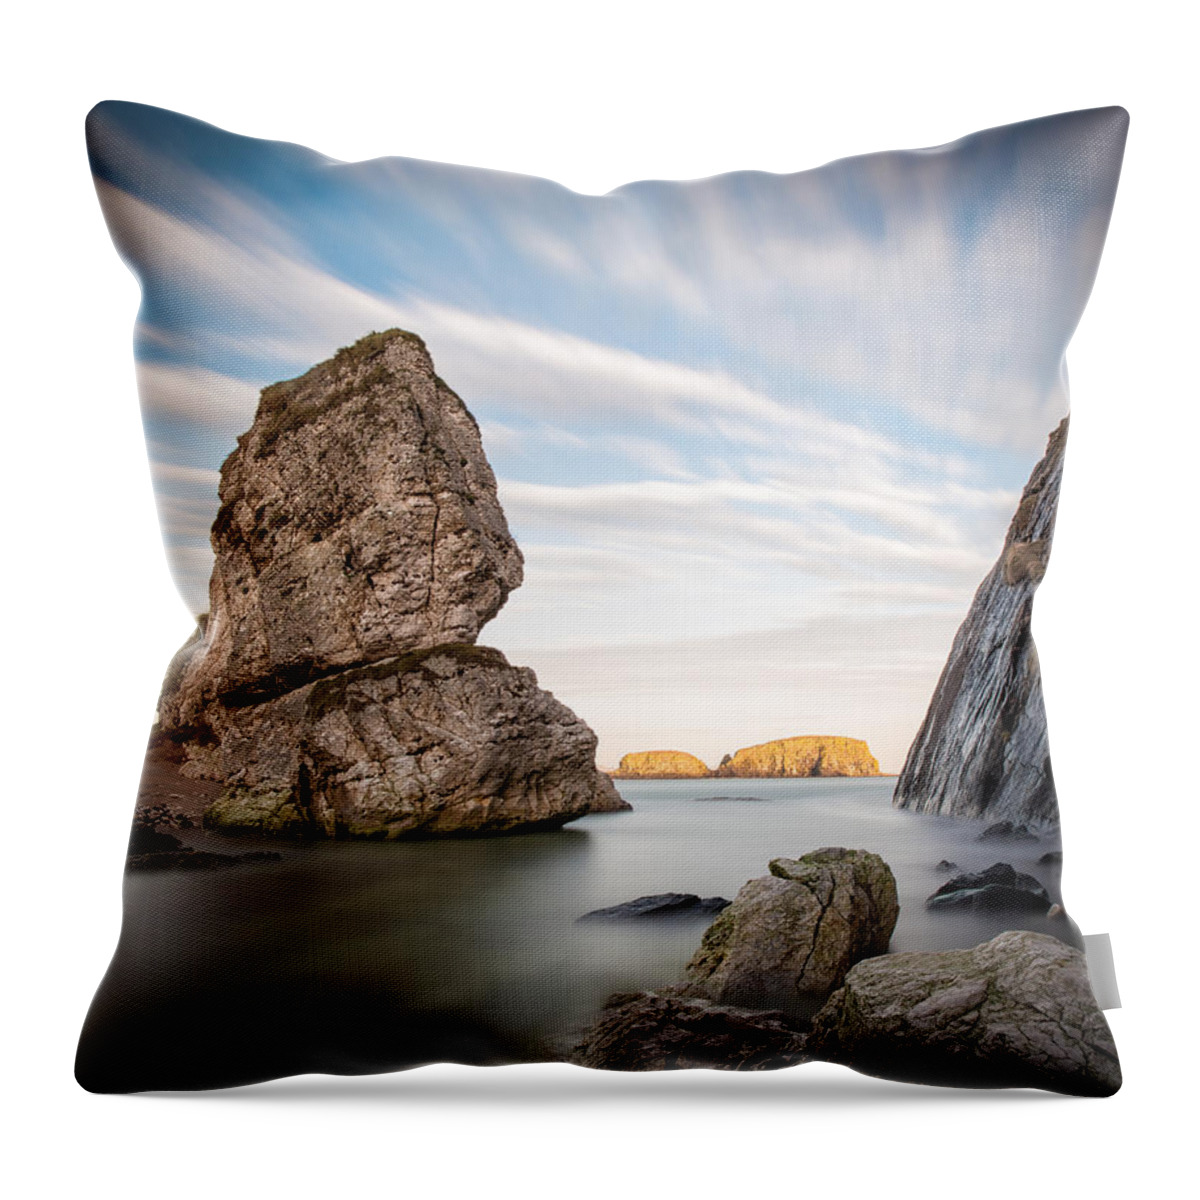 Sheep Island Throw Pillow featuring the photograph Sheep Island - Ballintoy by Nigel R Bell